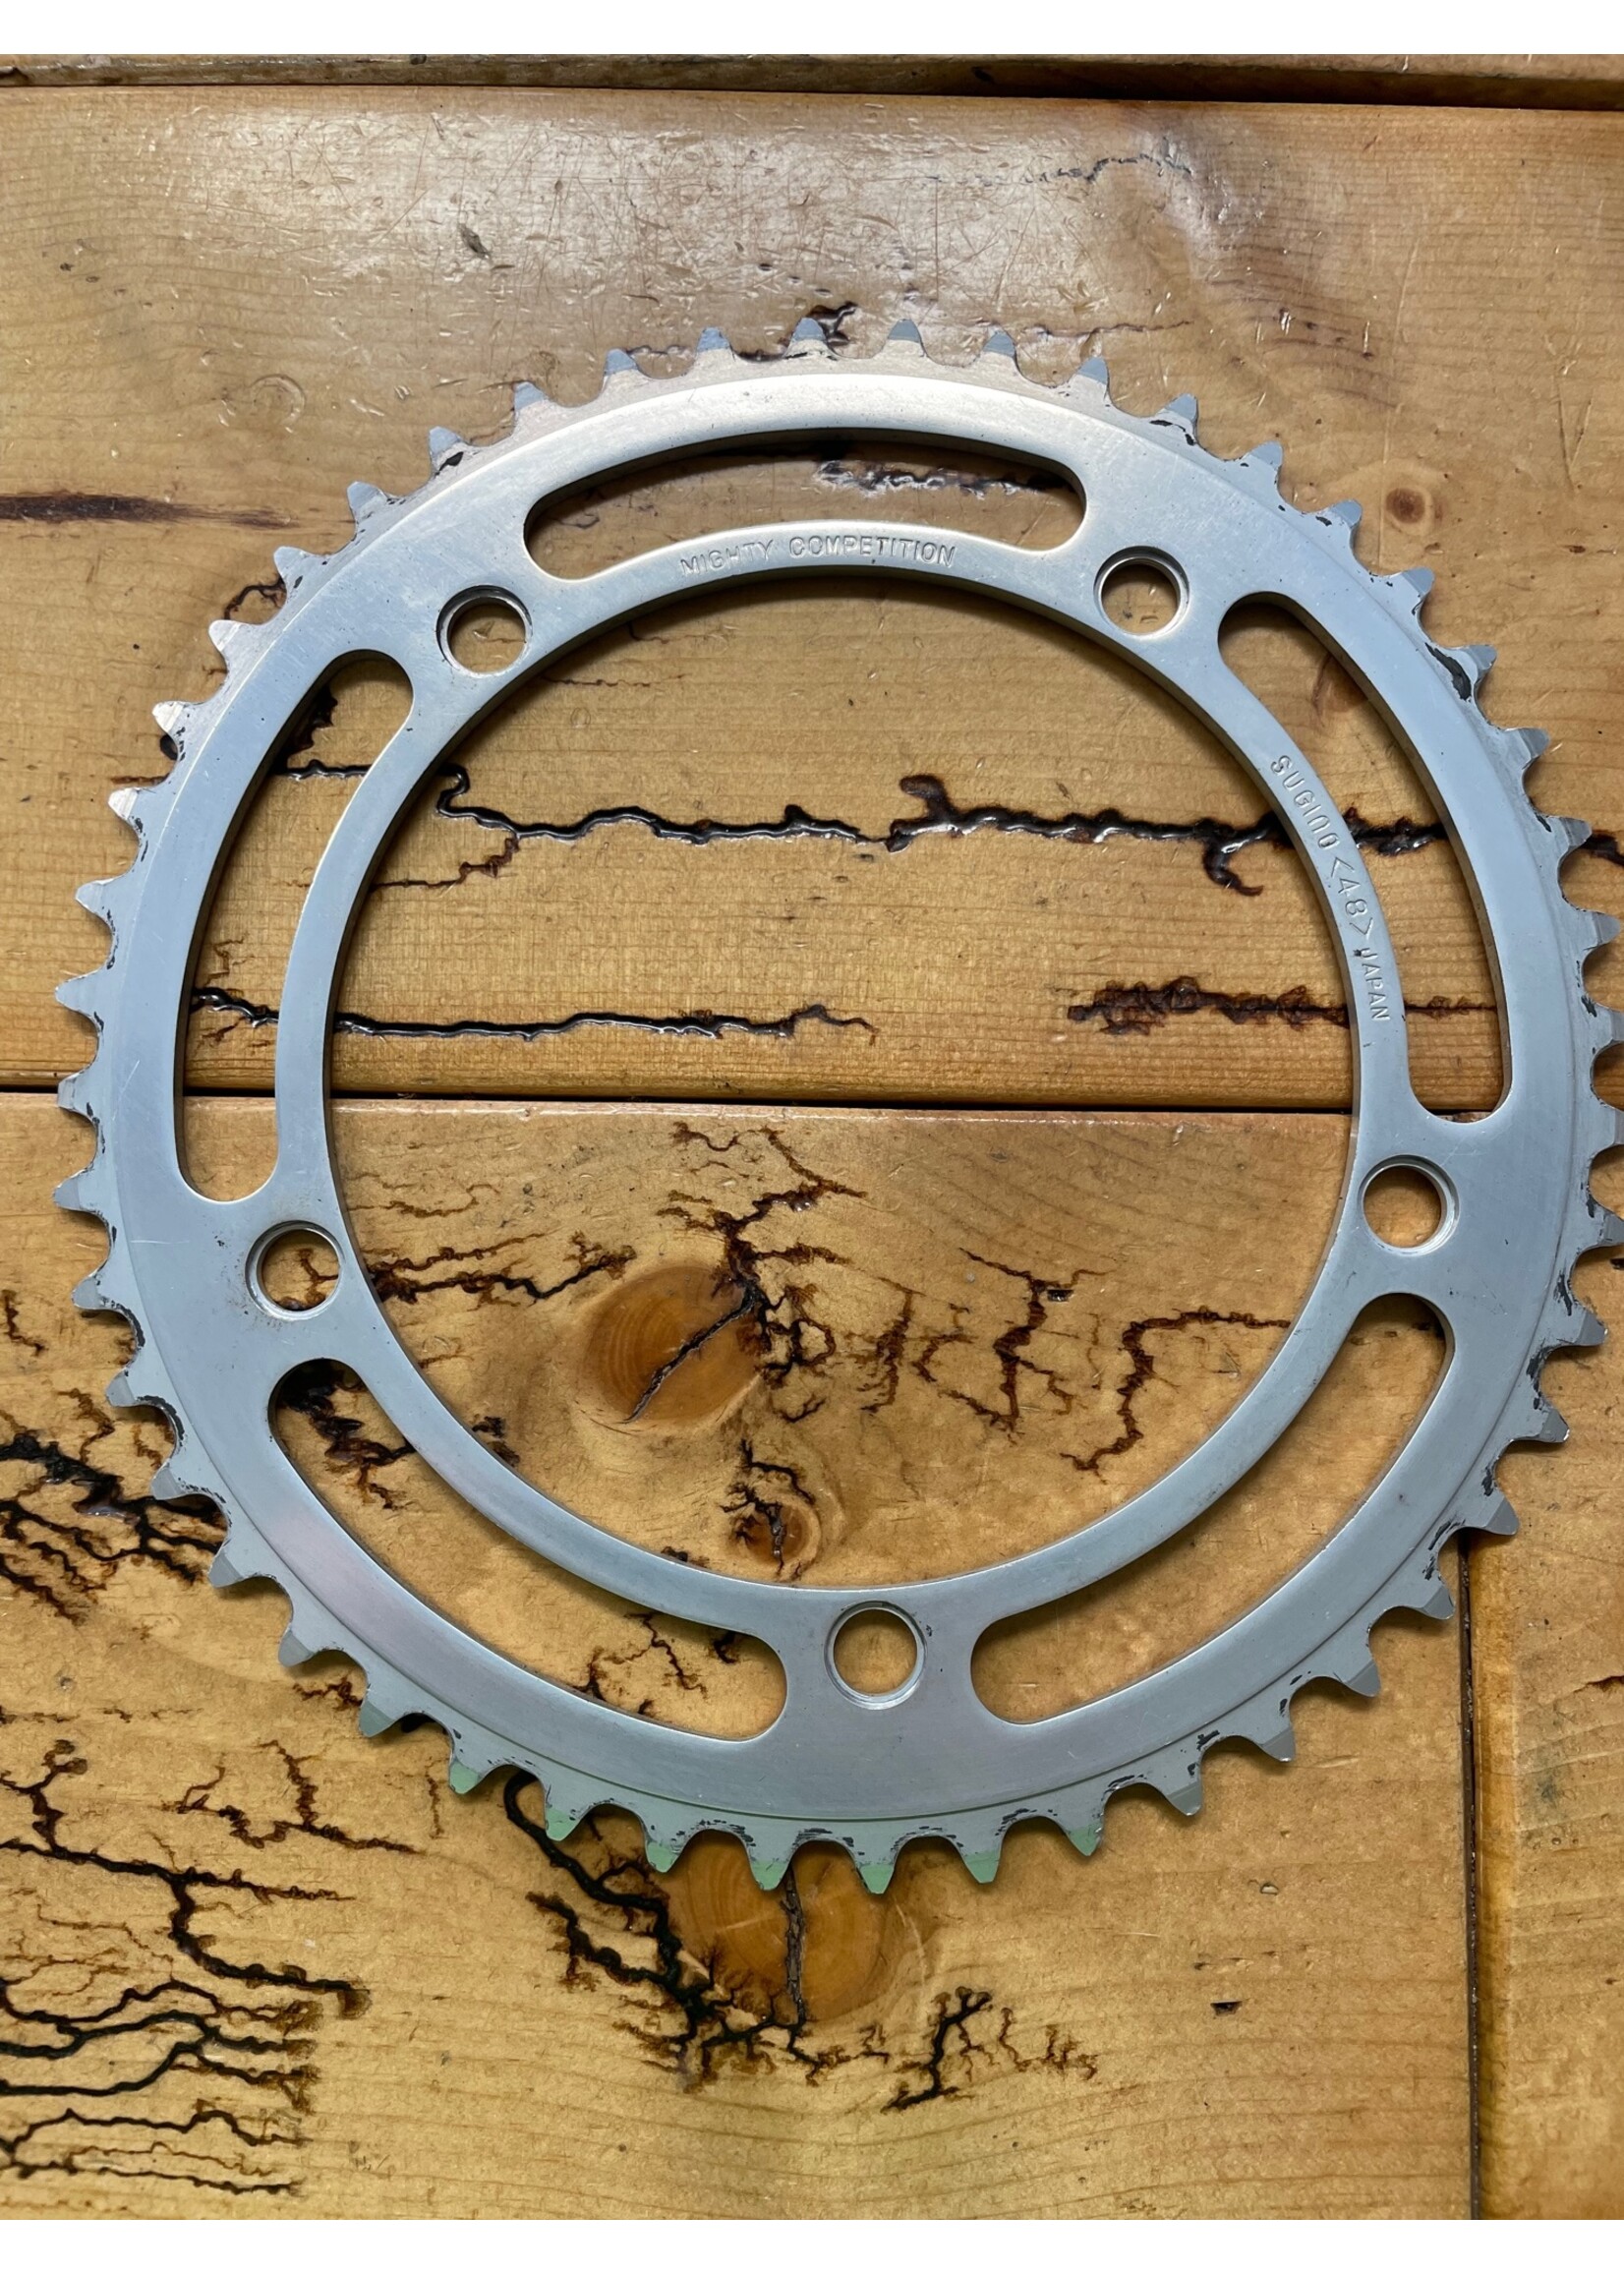 Sugino Sugino Mighty Competition 48 Tooth 144 BCD Chainring